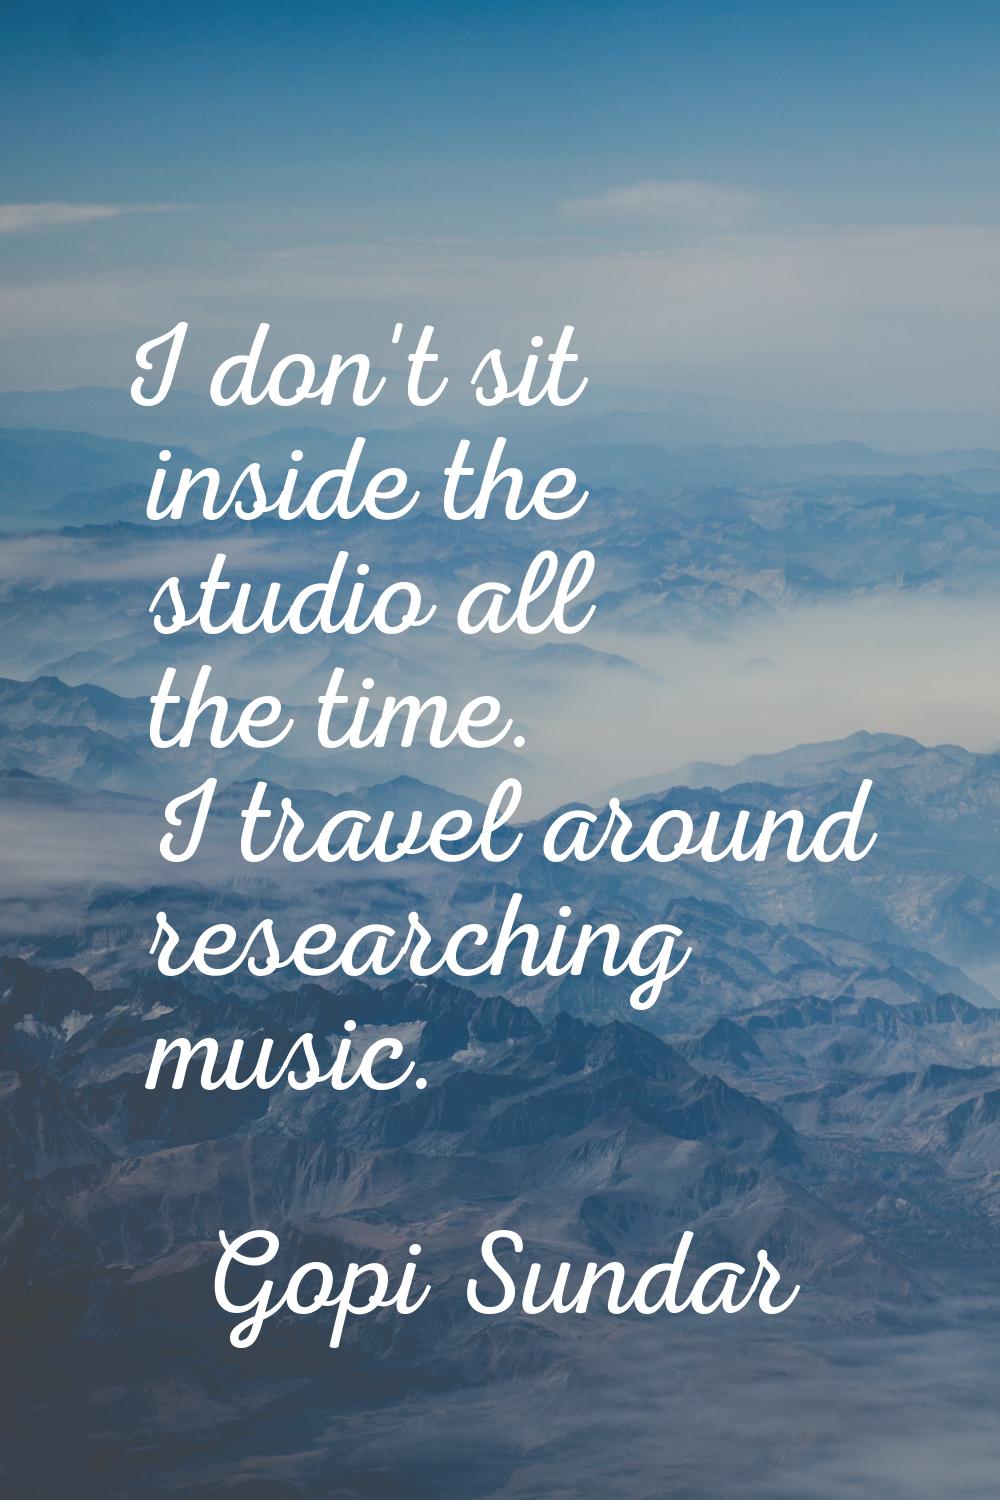 I don't sit inside the studio all the time. I travel around researching music.